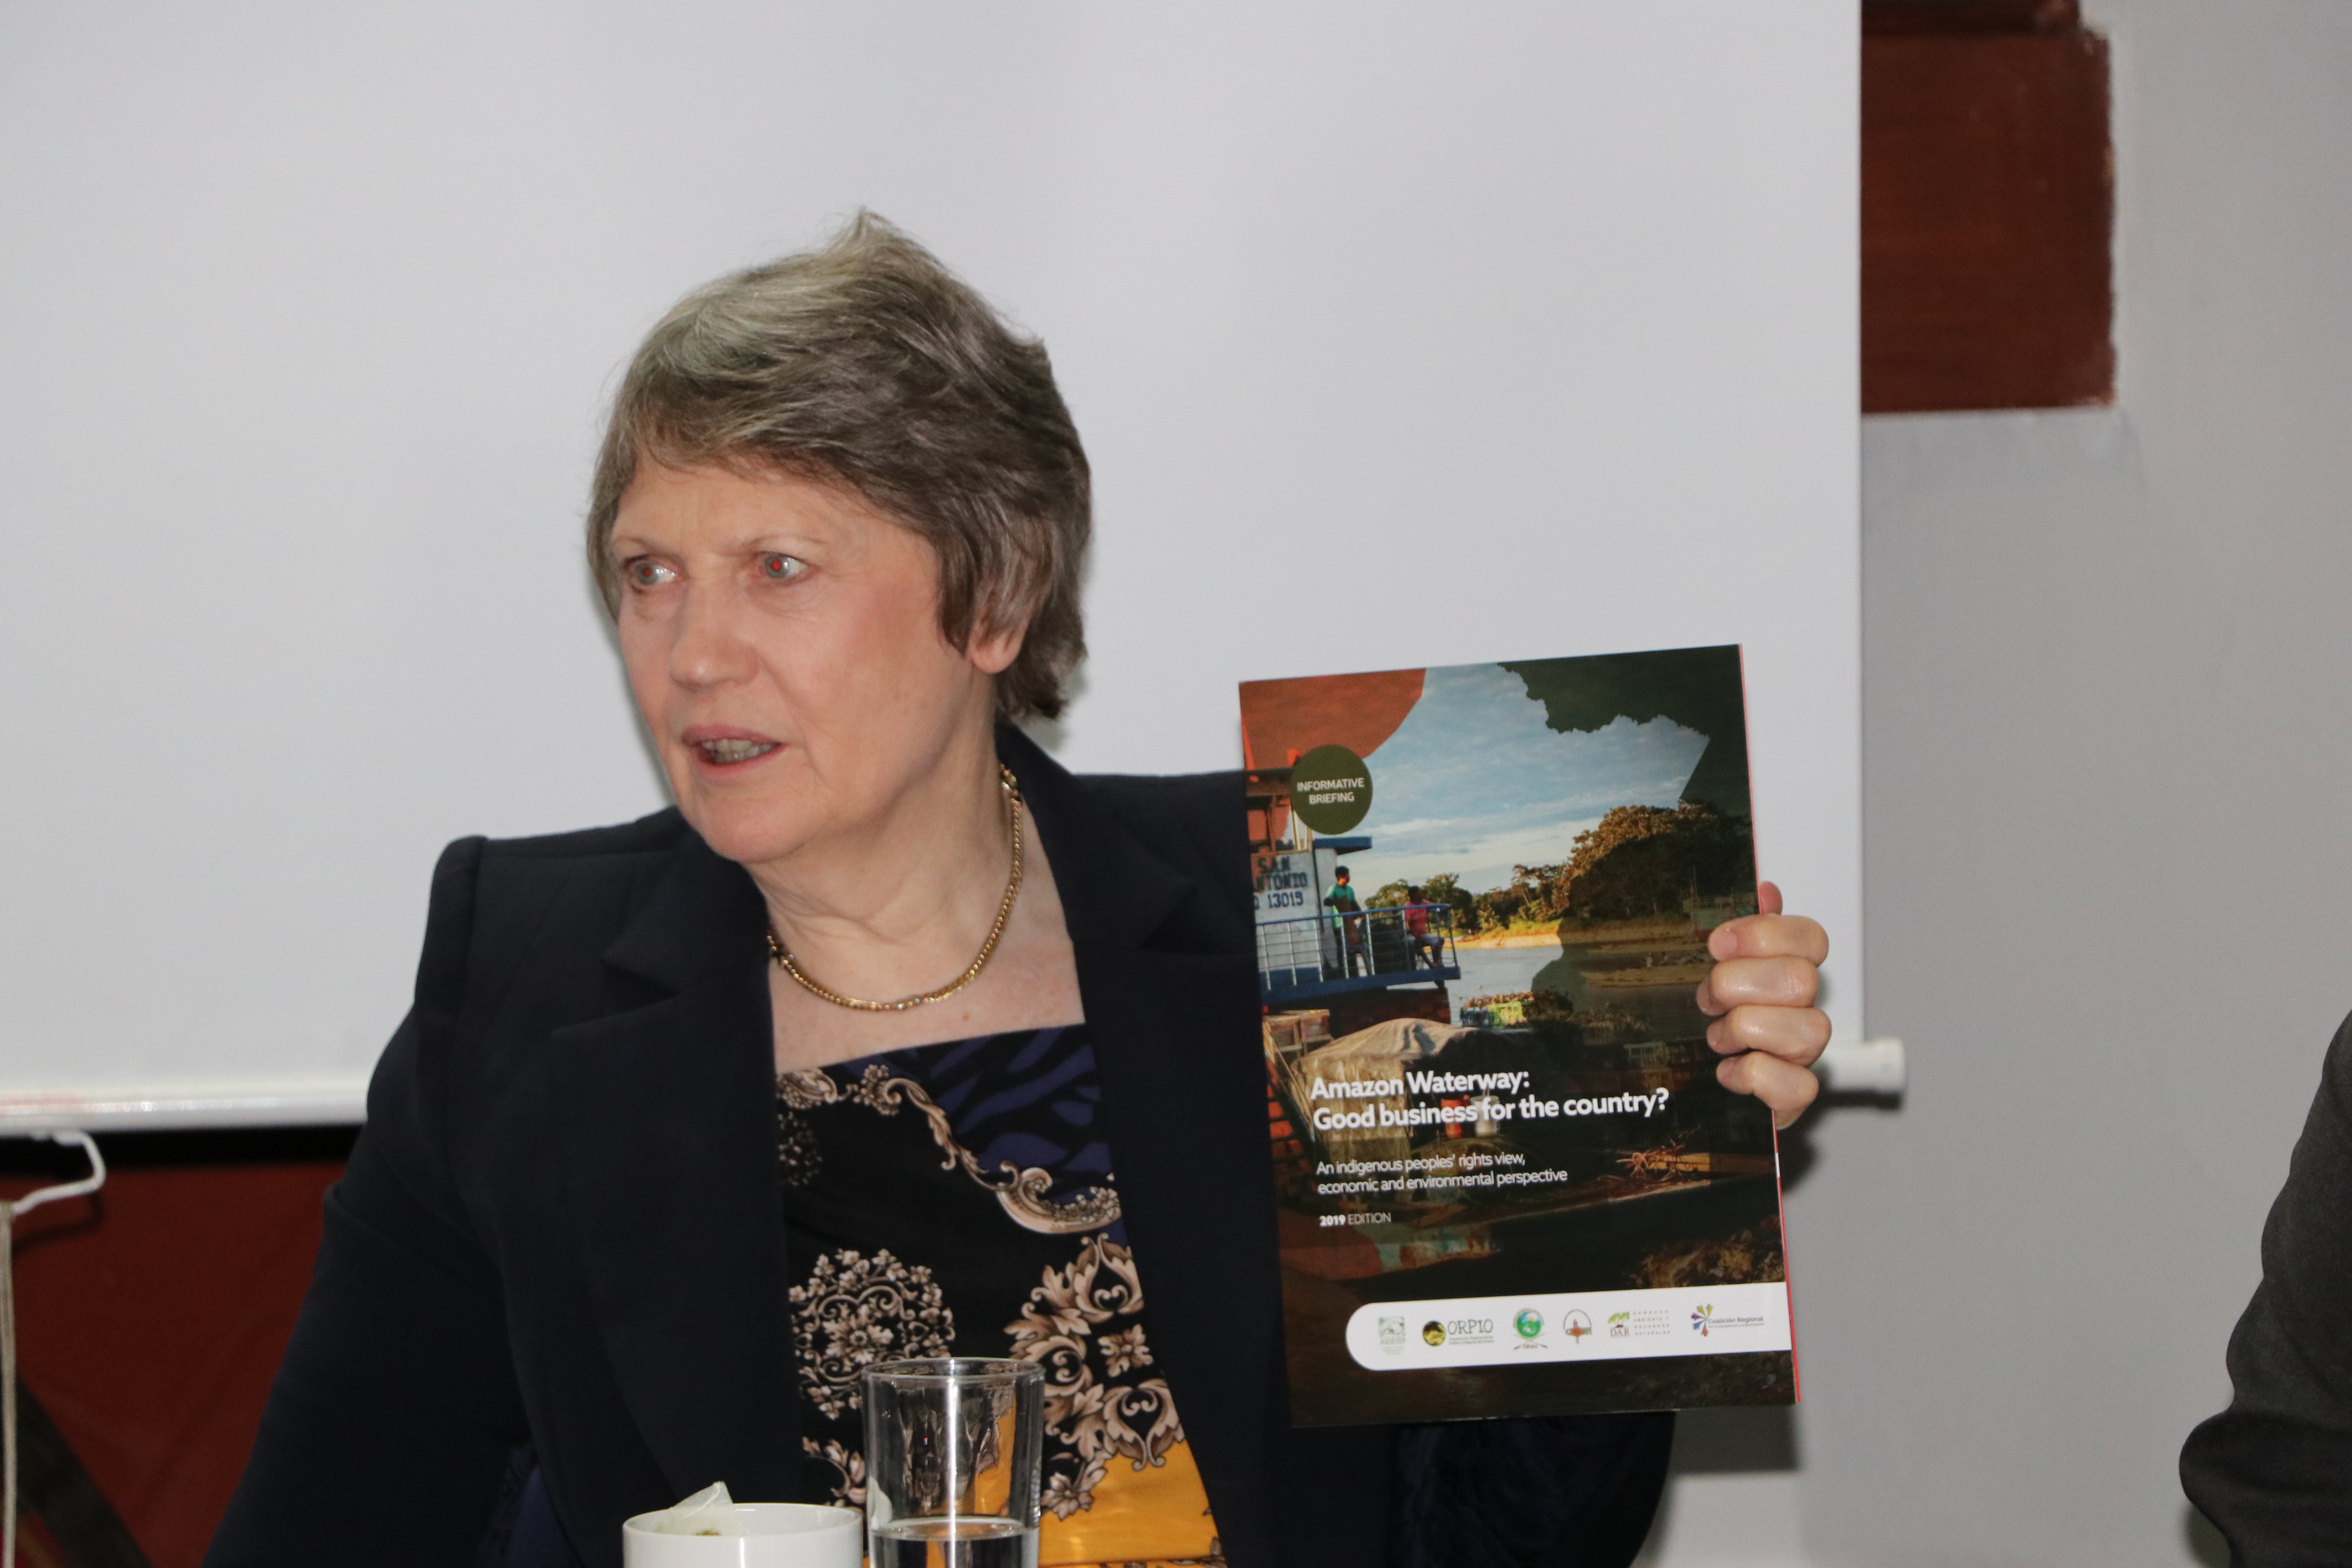 Helen Clark: Countries are facing the challenge of making environmental information and payments transparent